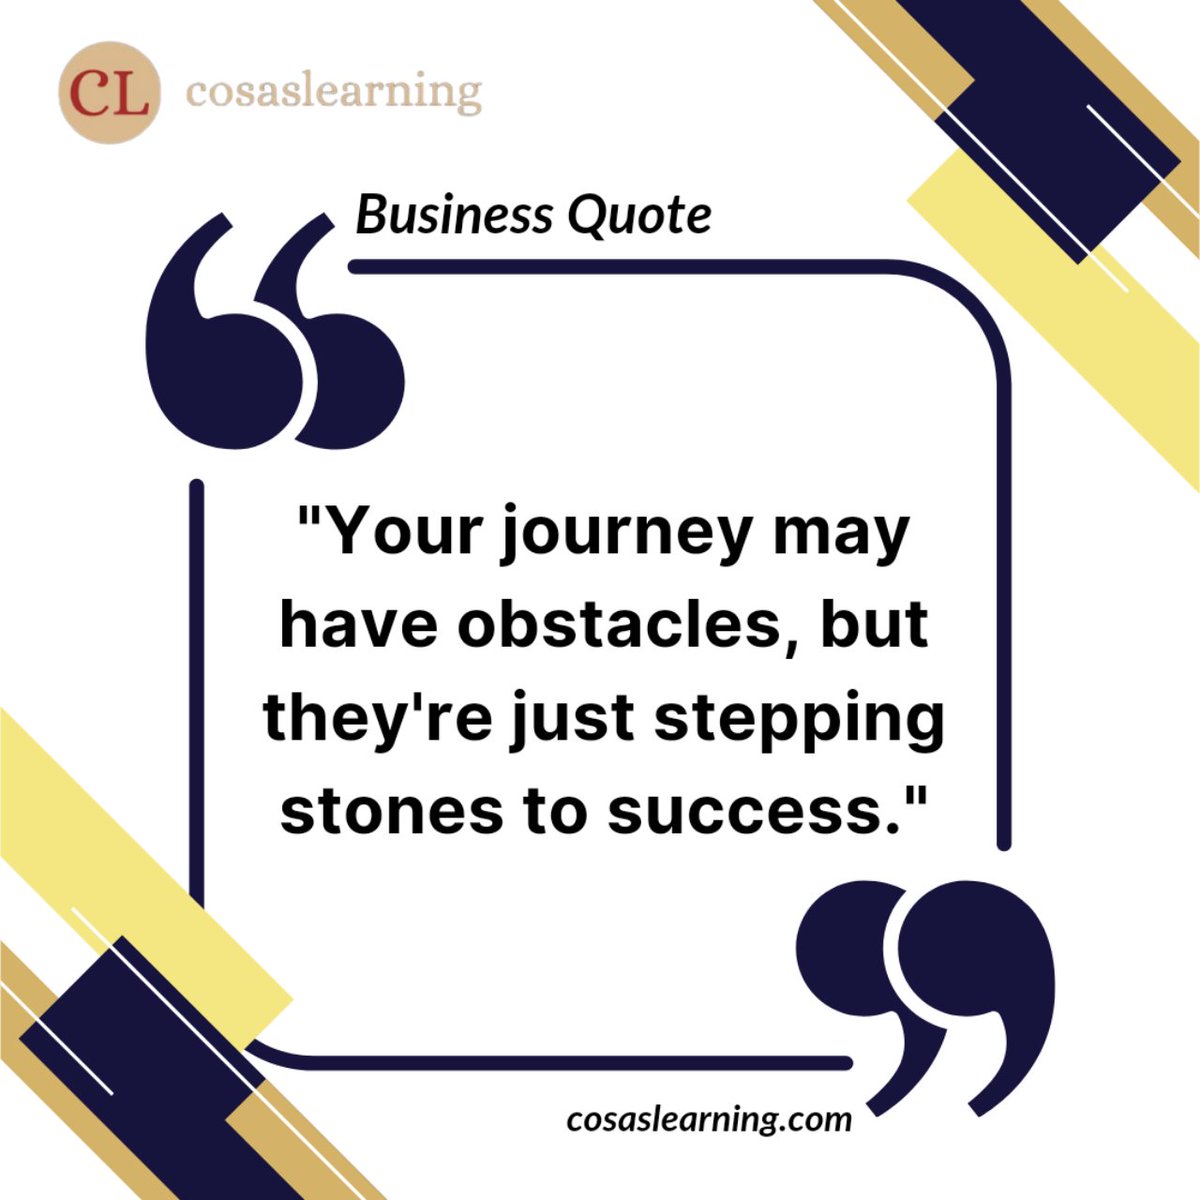 Business Quotes I Cosas Learning | Daily Motivation 

#cosas #tools #tool #cosaslearning #coding #Programming #business #BusinessGrowth #entrepreneur #entrepreneurs